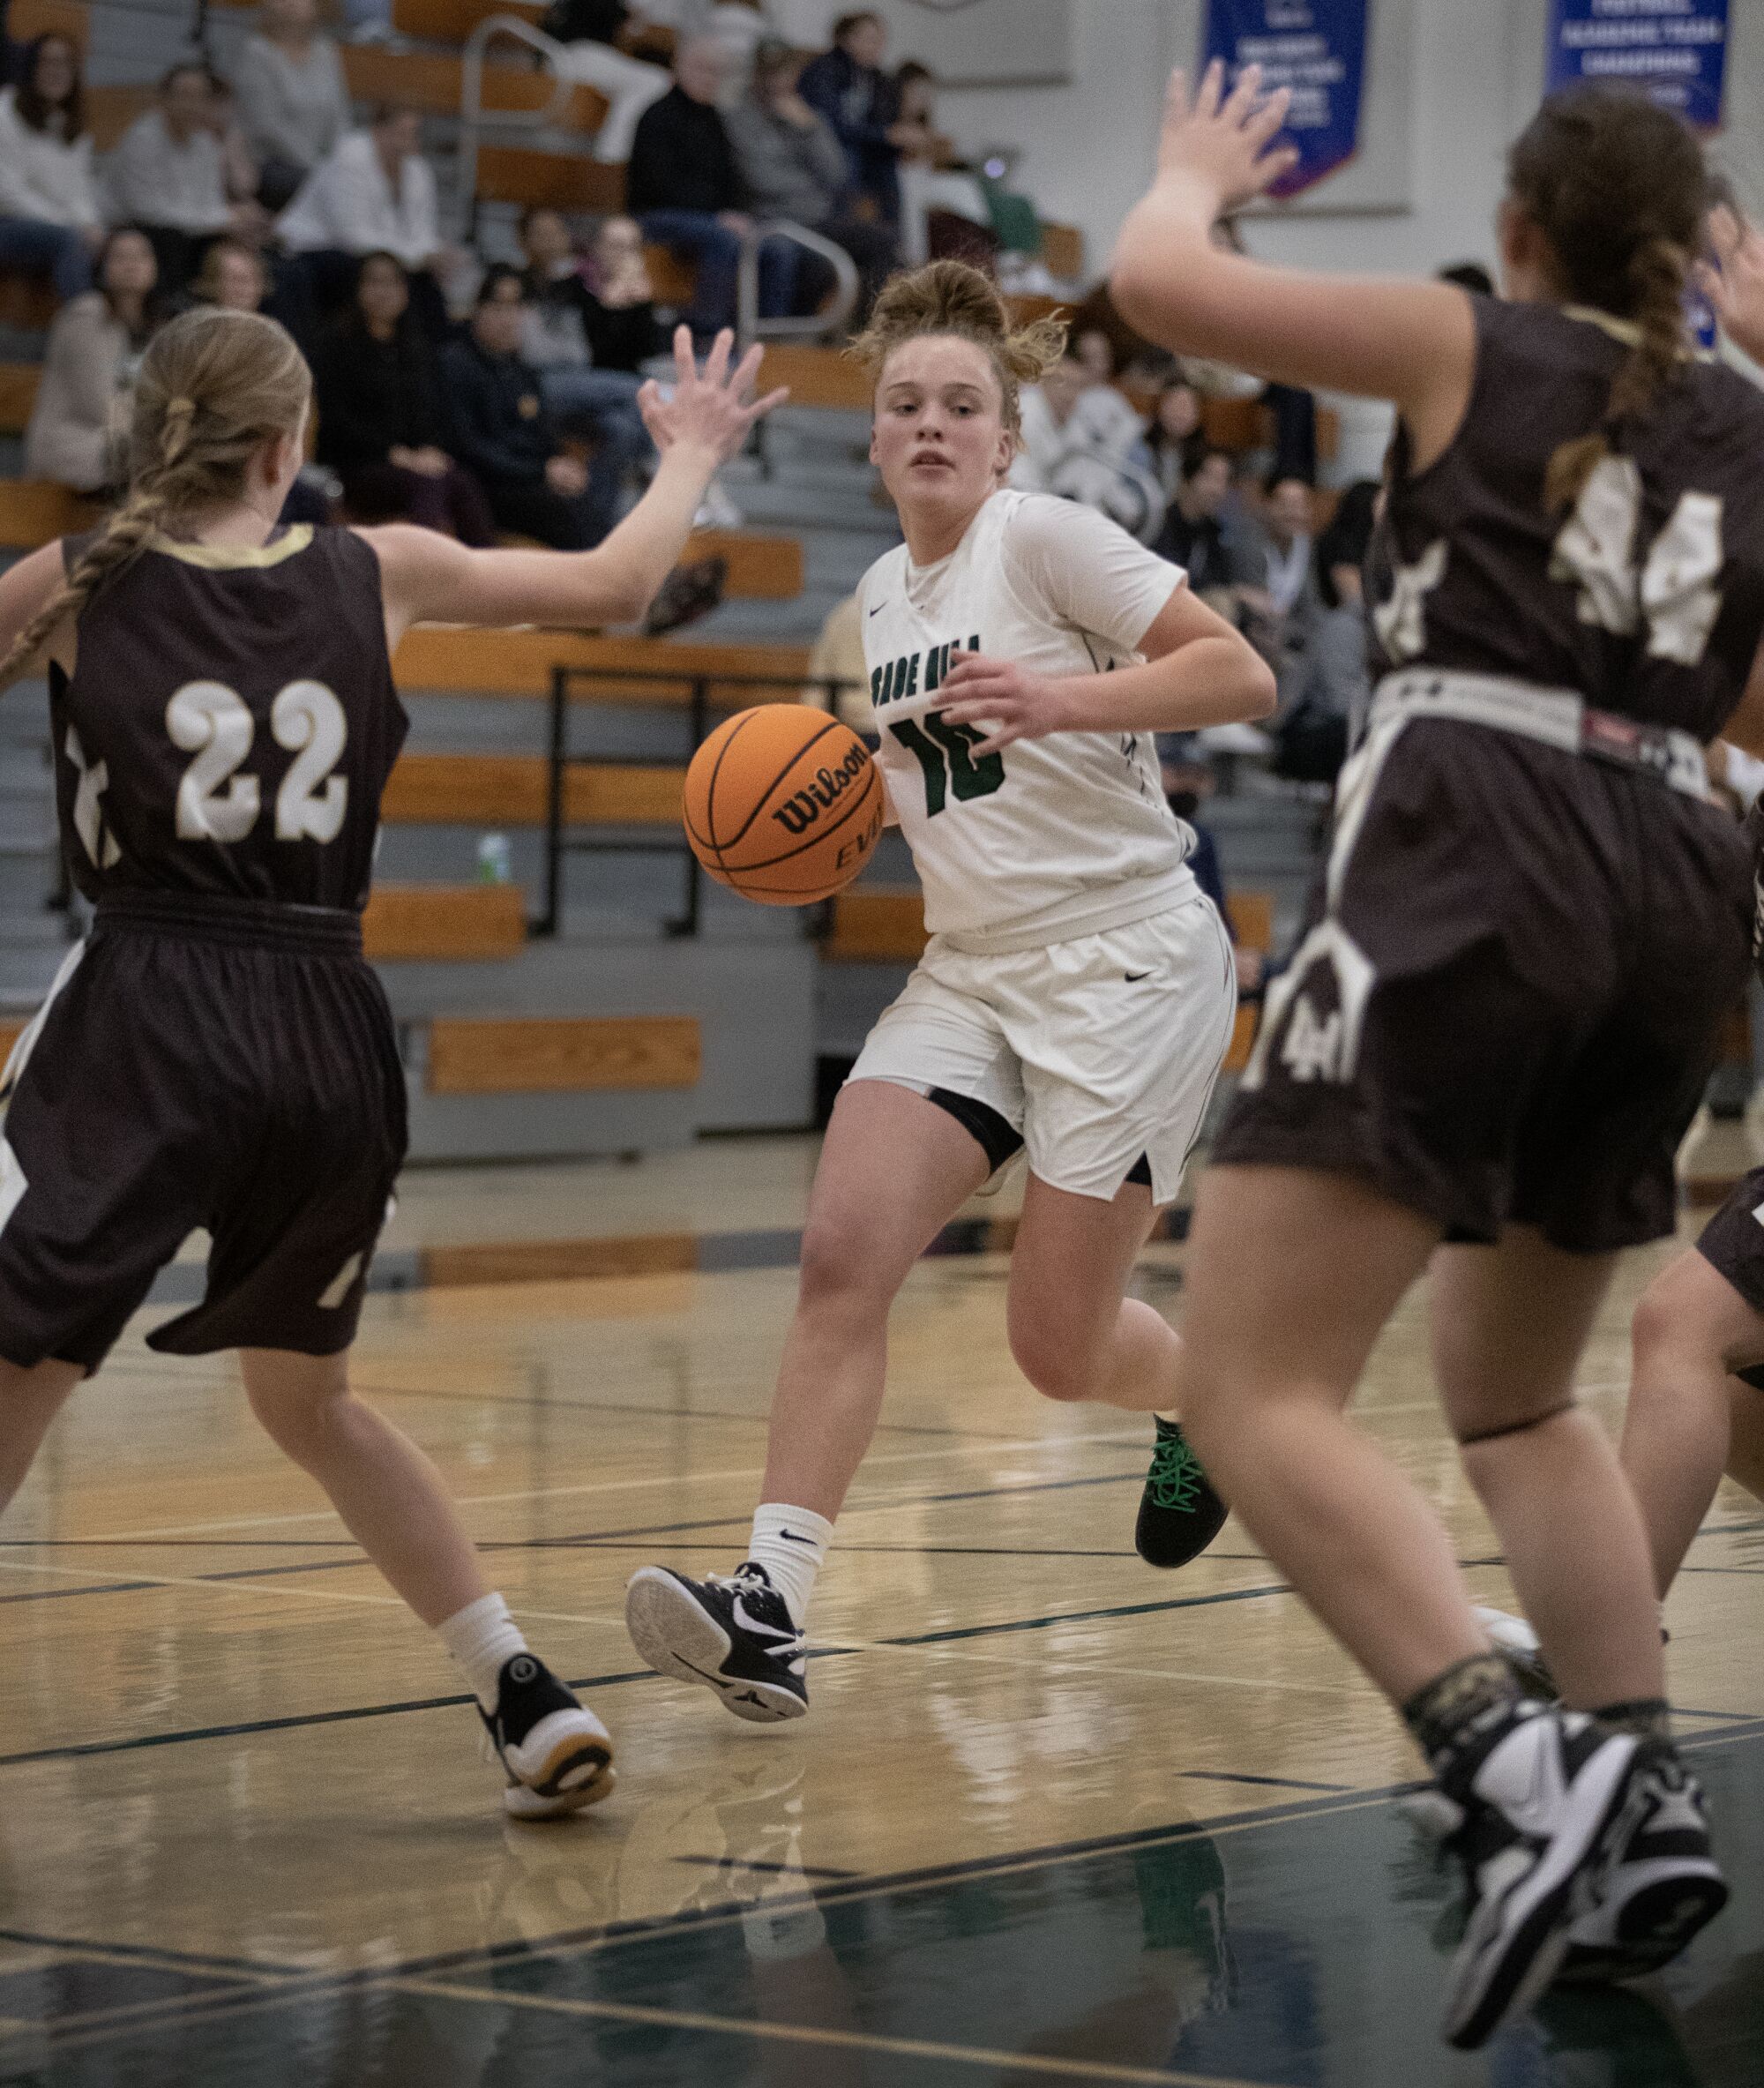 Sage Hill point guard Amalia Holguin drives to the hoop during a game against Laguna Hills.